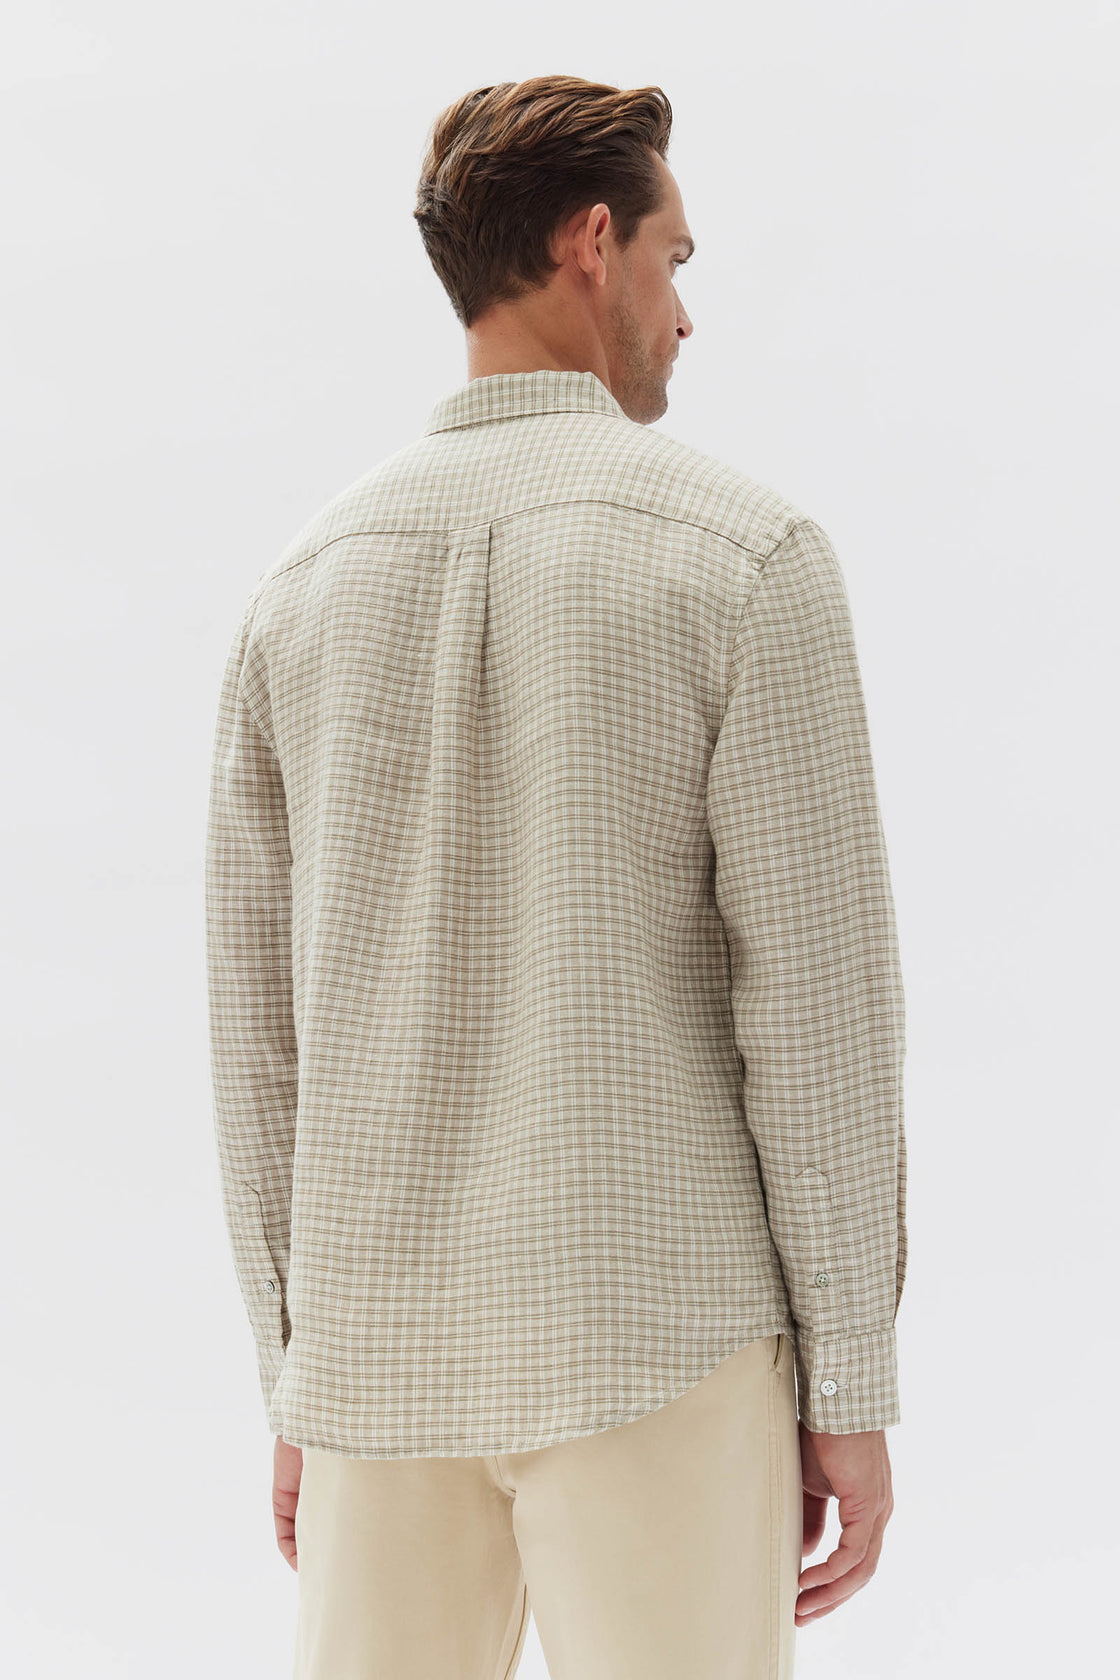 Assembly Label | Micro Check Long Sleeve Shirt - Moss Check